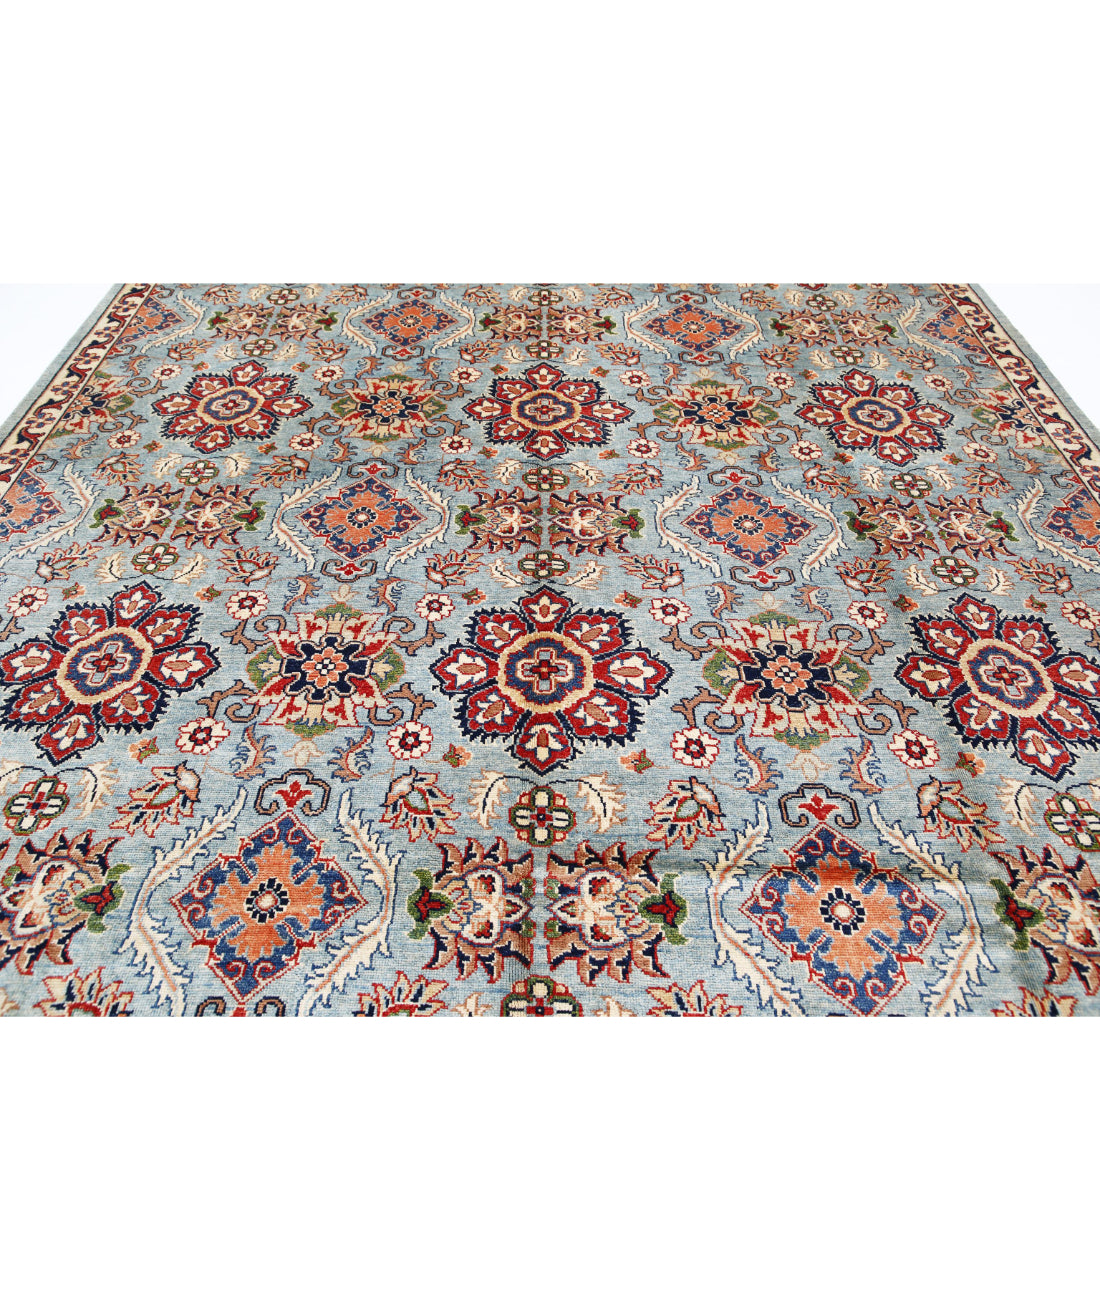 Ziegler 9'9'' X 14'0'' Hand-Knotted Wool Rug 9'9'' x 14'0'' (293 X 420) / Blue / N/A